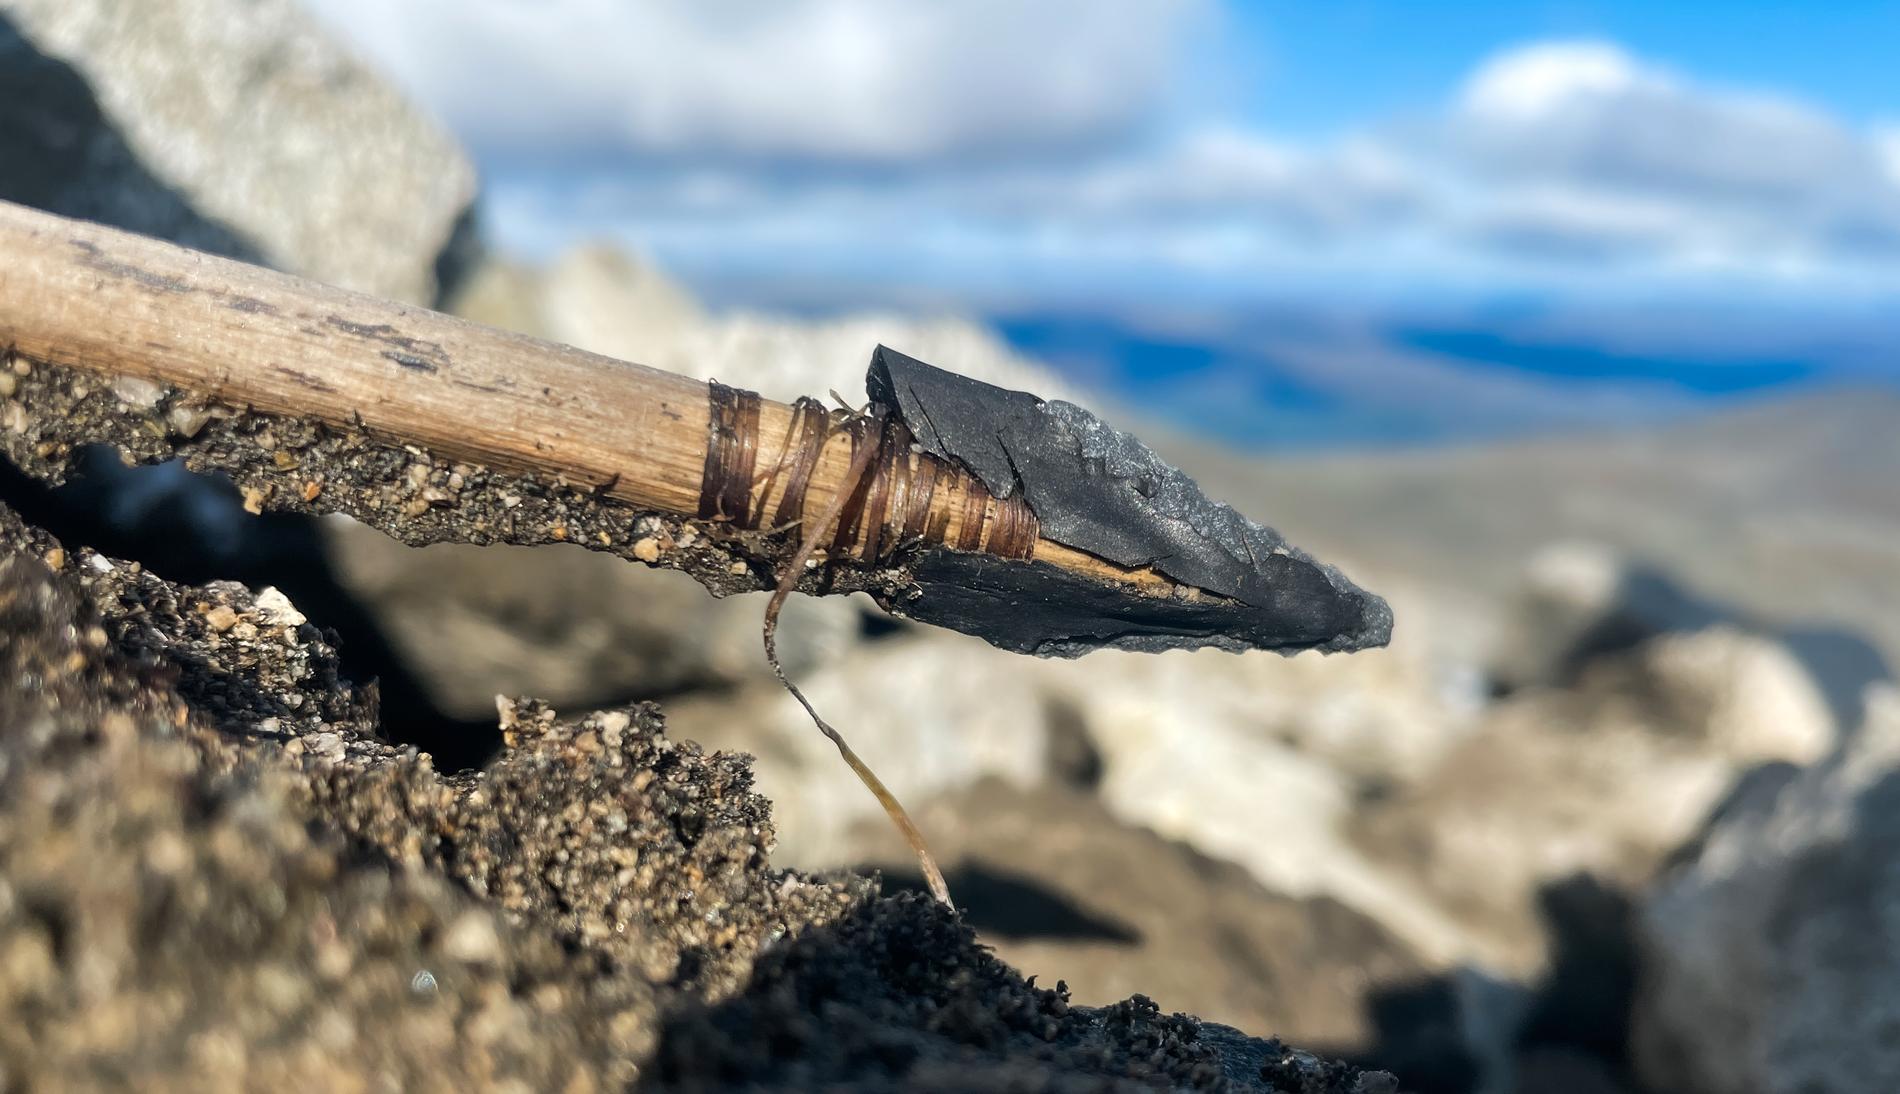 Two Bronze Age arrowheads found at Jotunheiman: – Very well preserved